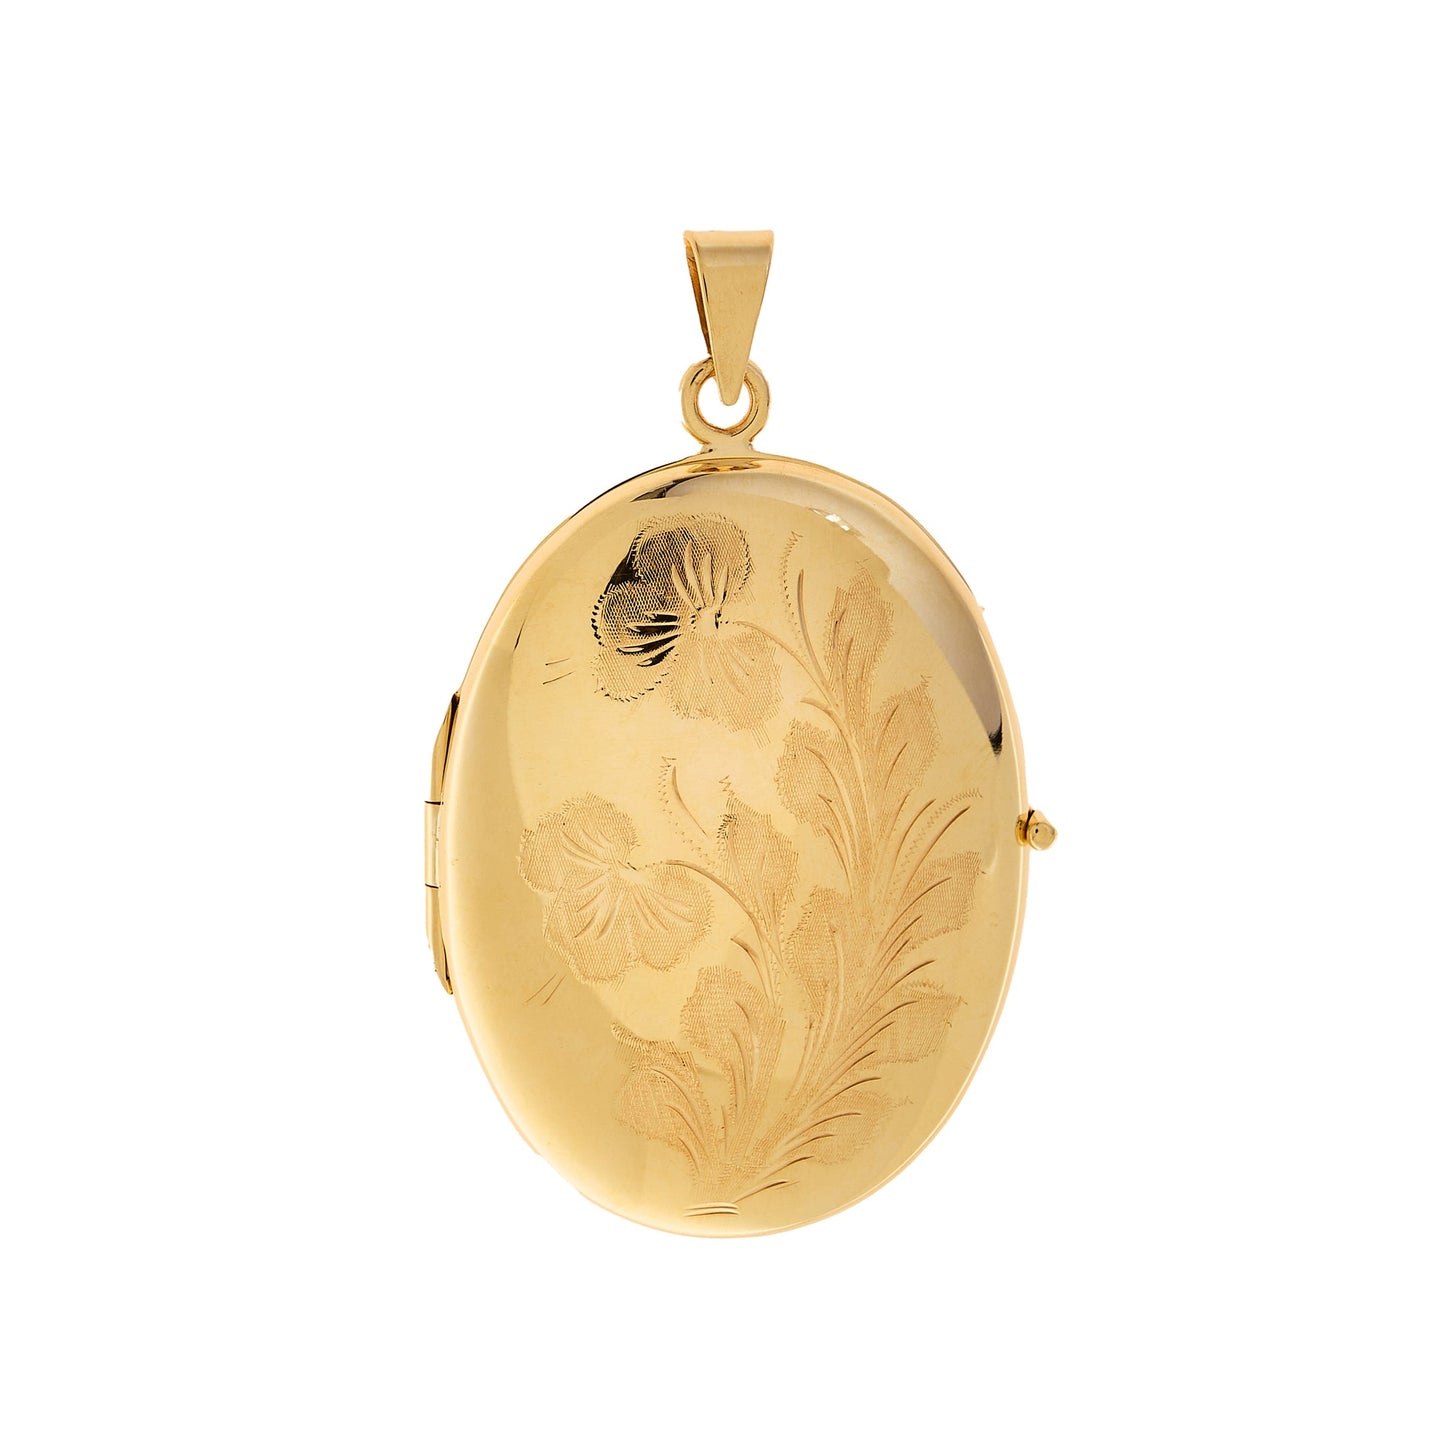 Pre-Owned 9ct Gold Oval Locket Flower Engraving